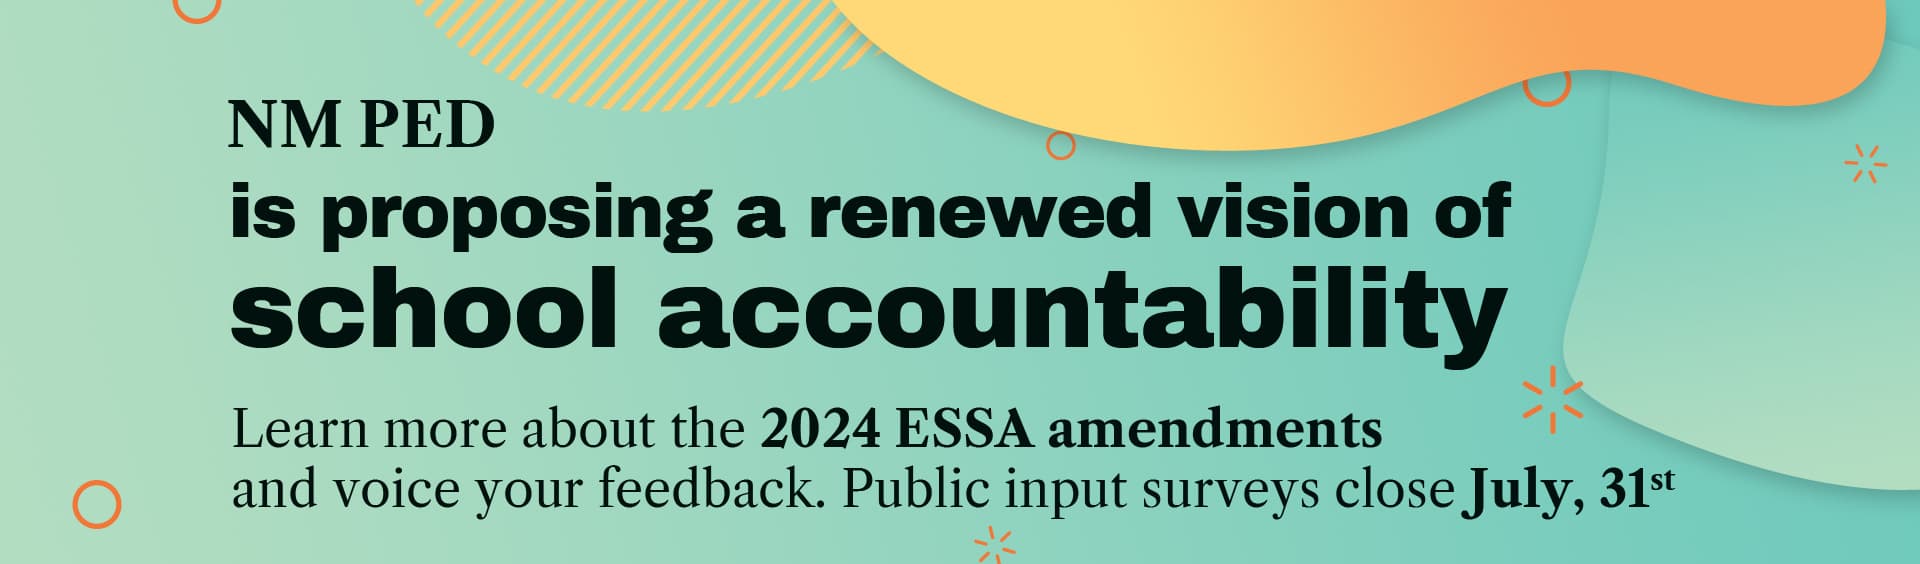 NM PED is proposing a renewed vision of school accountability. Learn more about the 2024 ESSA amendments and voice your feedback.